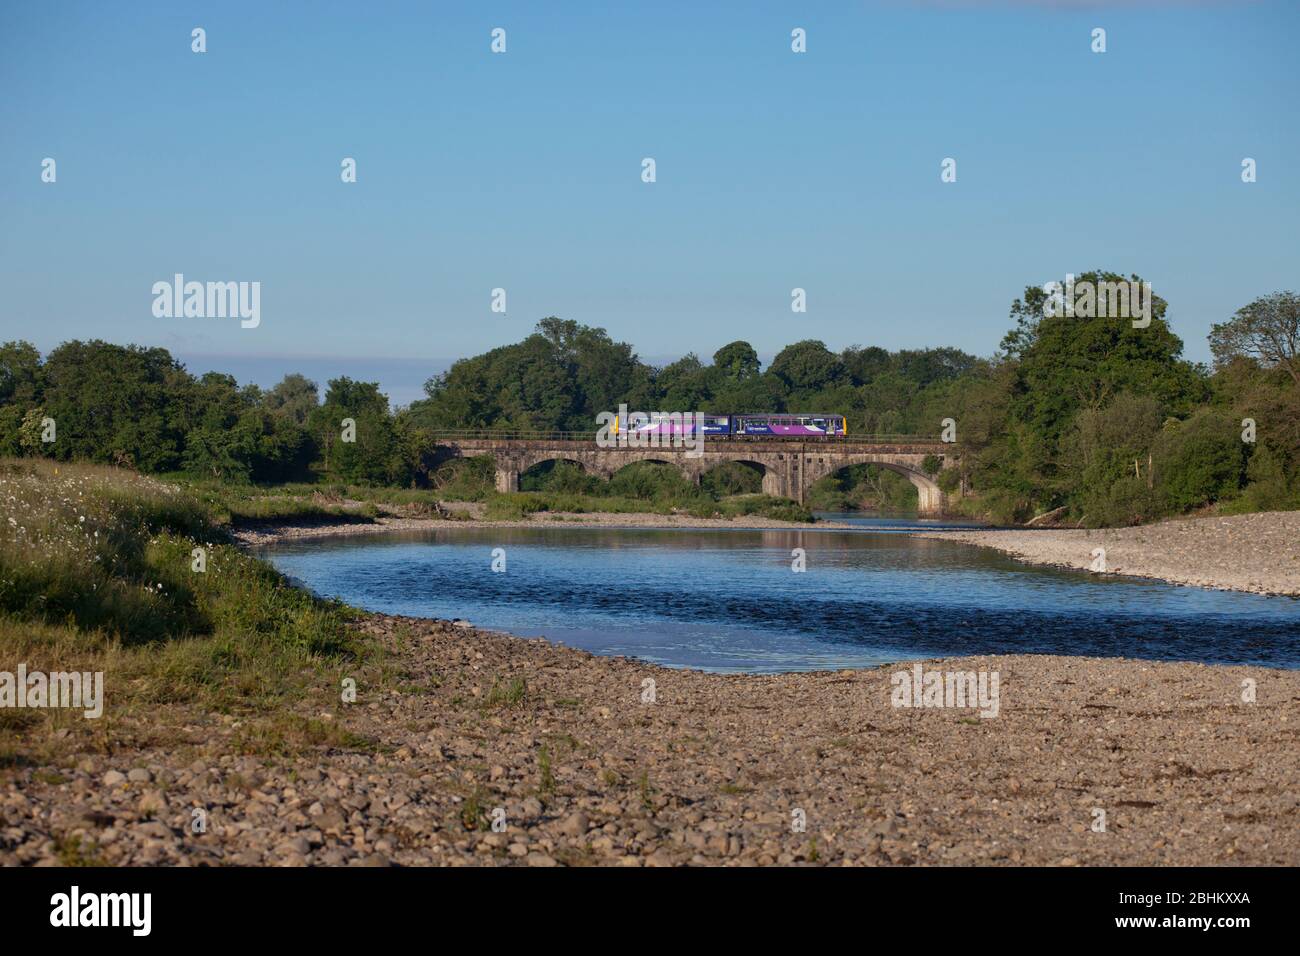 Northern Rail class 144 pacer train crossing the river lune  viaduct at Arkholme on the scenic 'little north western' railway line in Lancashire Stock Photo